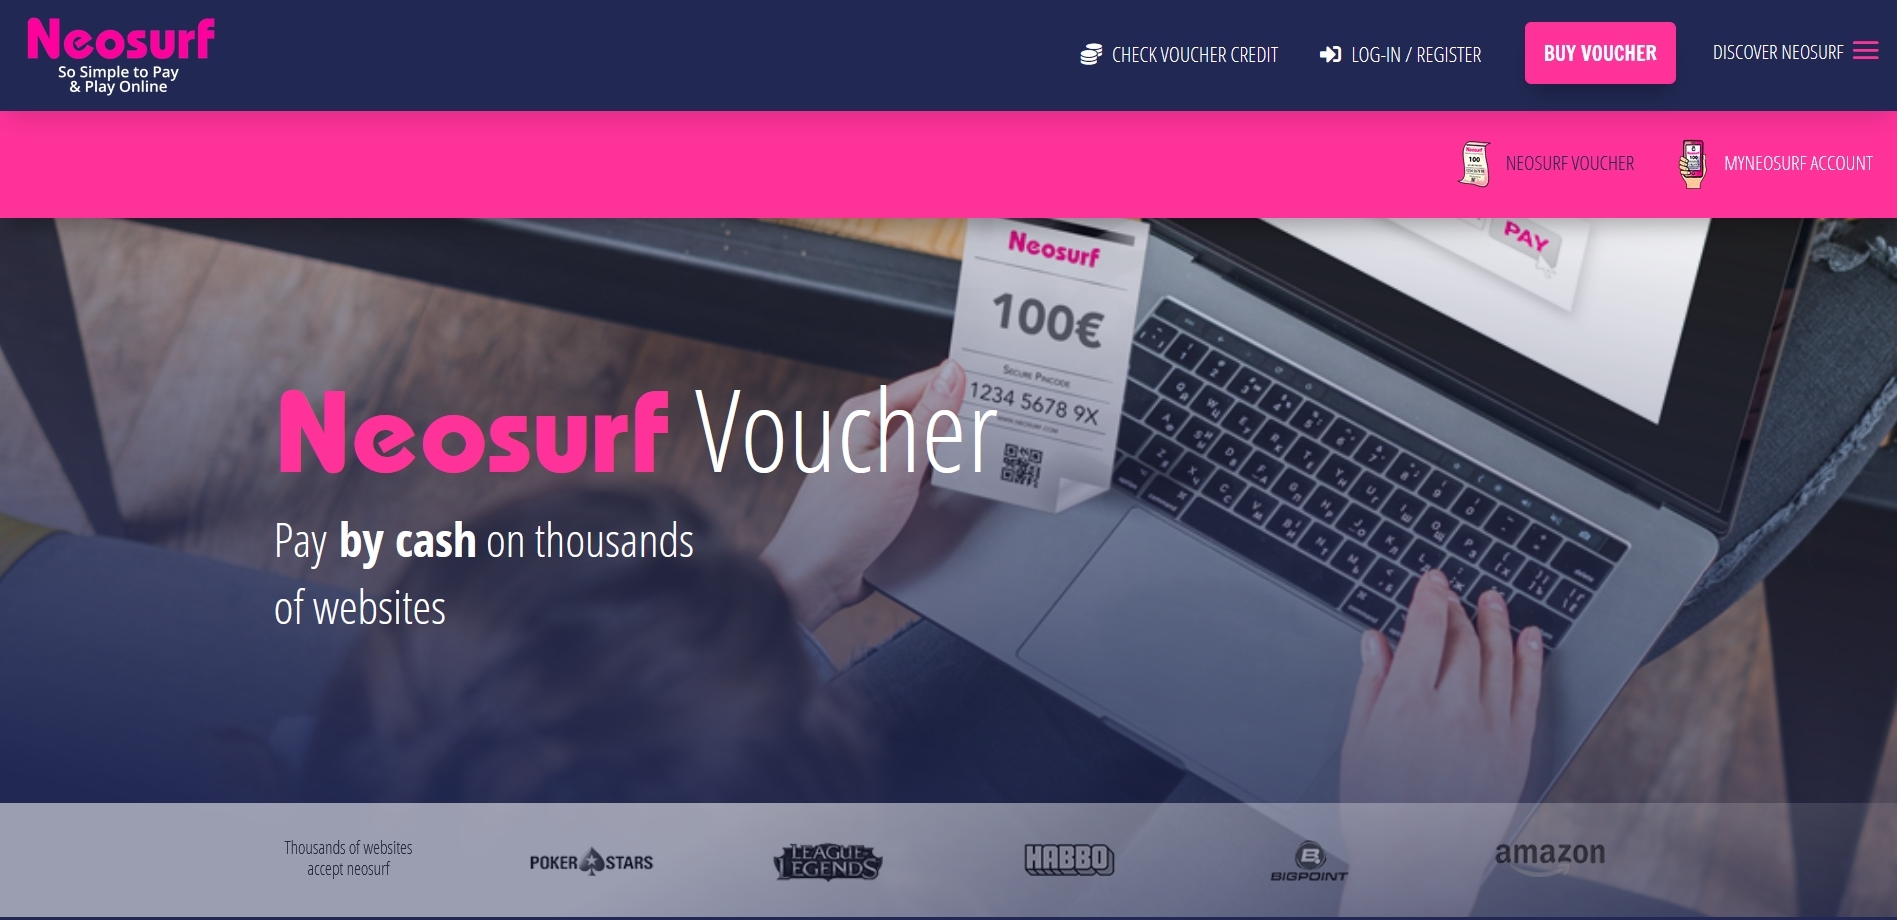 Neosurf €30 Gift Card BE 36.22 $